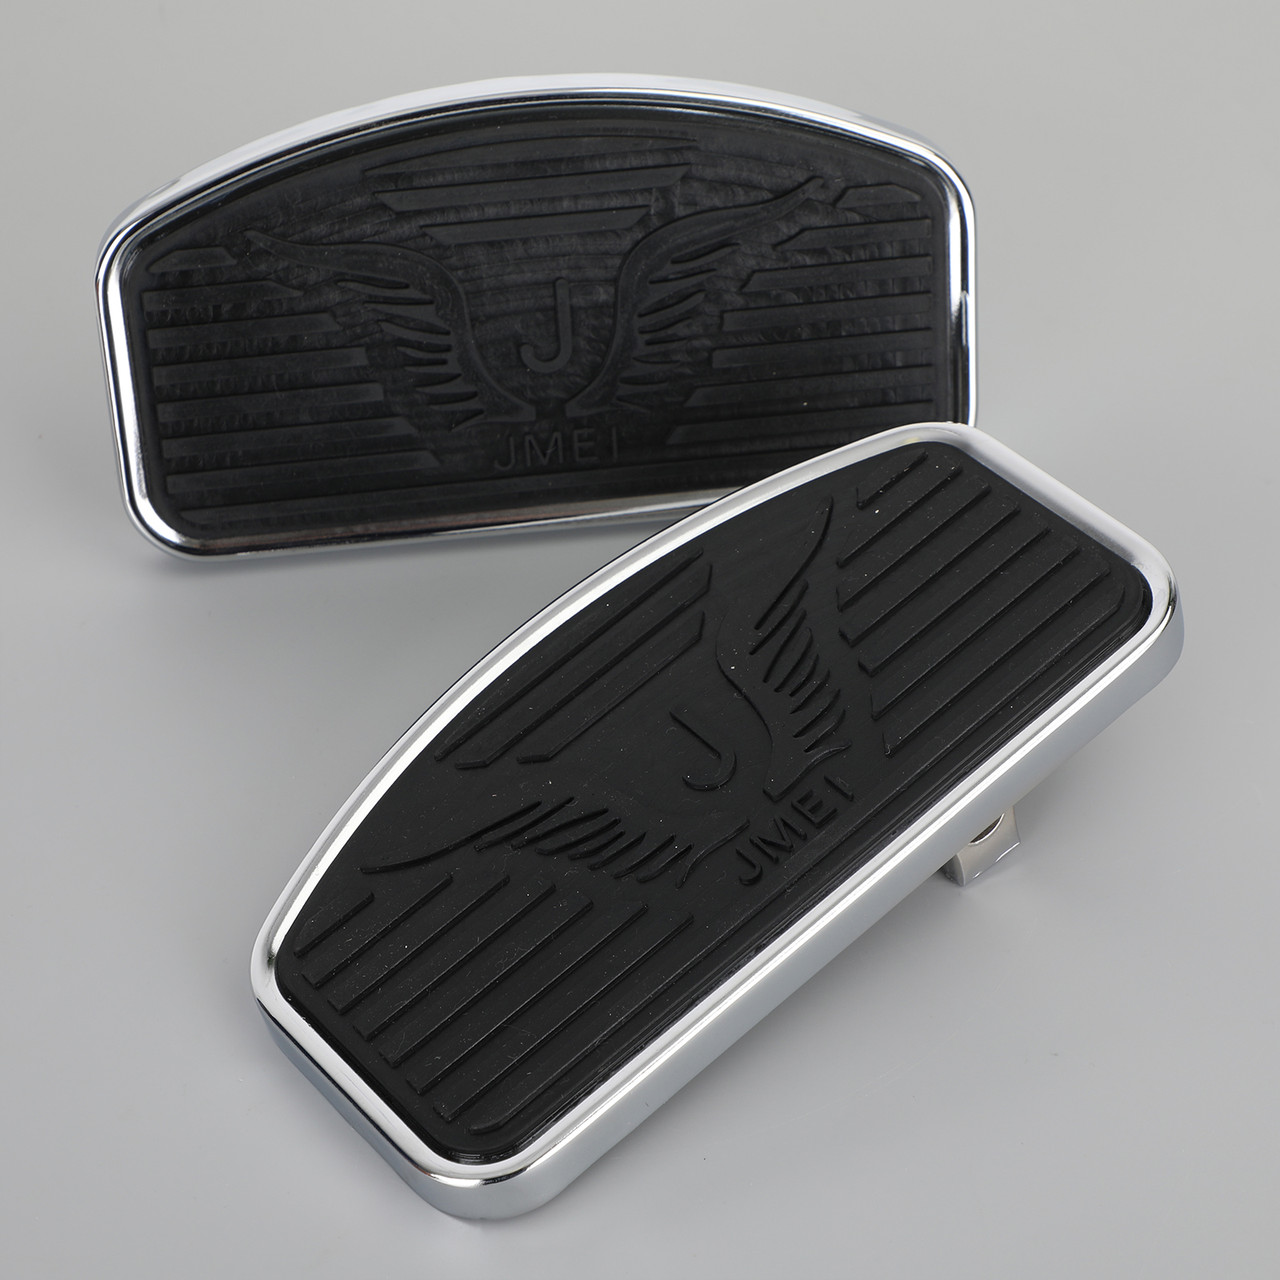 Front Floorboard Footboard fit for Dyna Sportster Touring Softail CVO